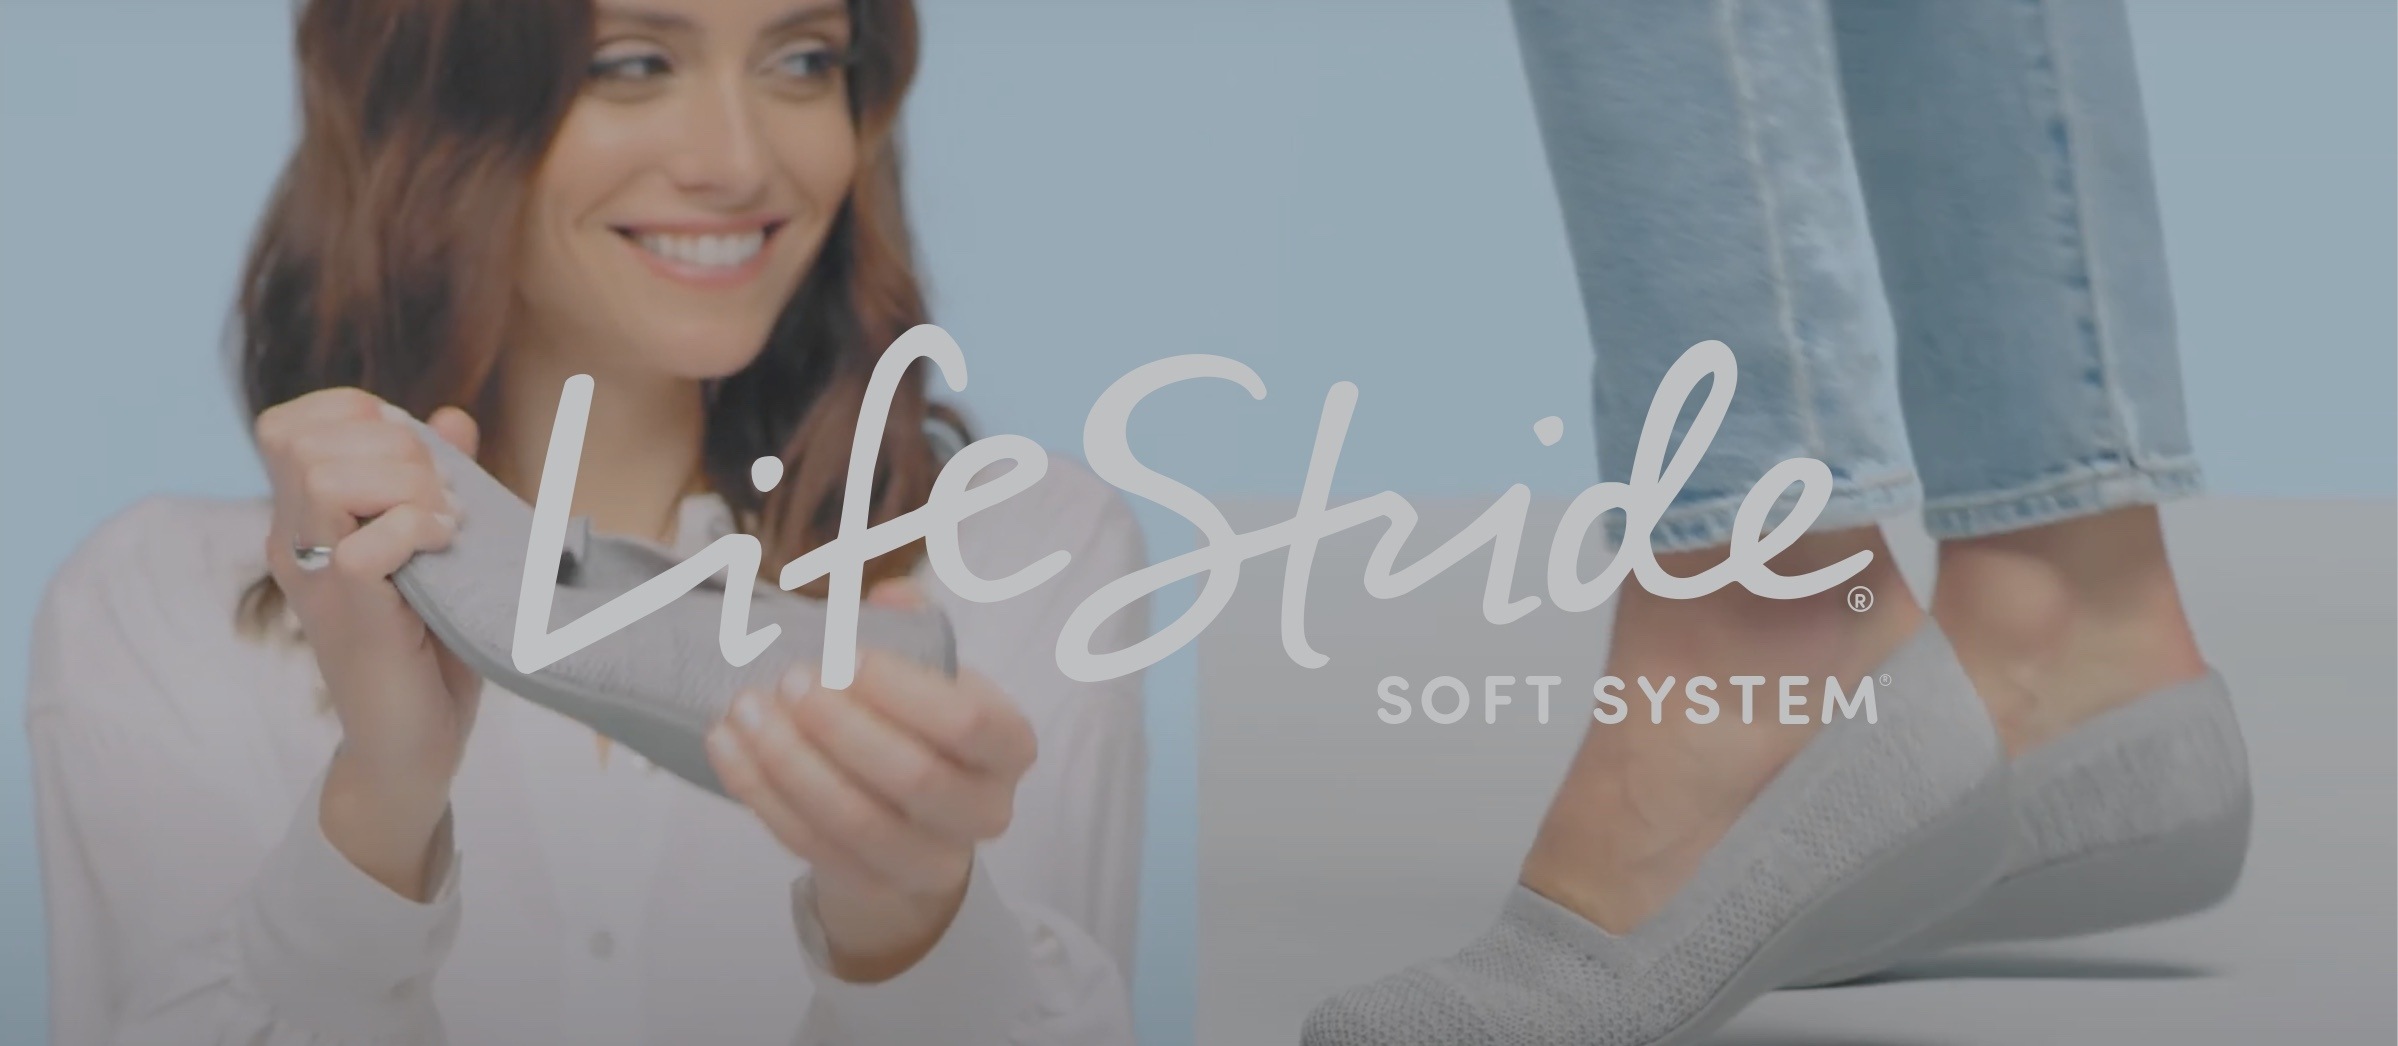 lifestyle soft system shoes